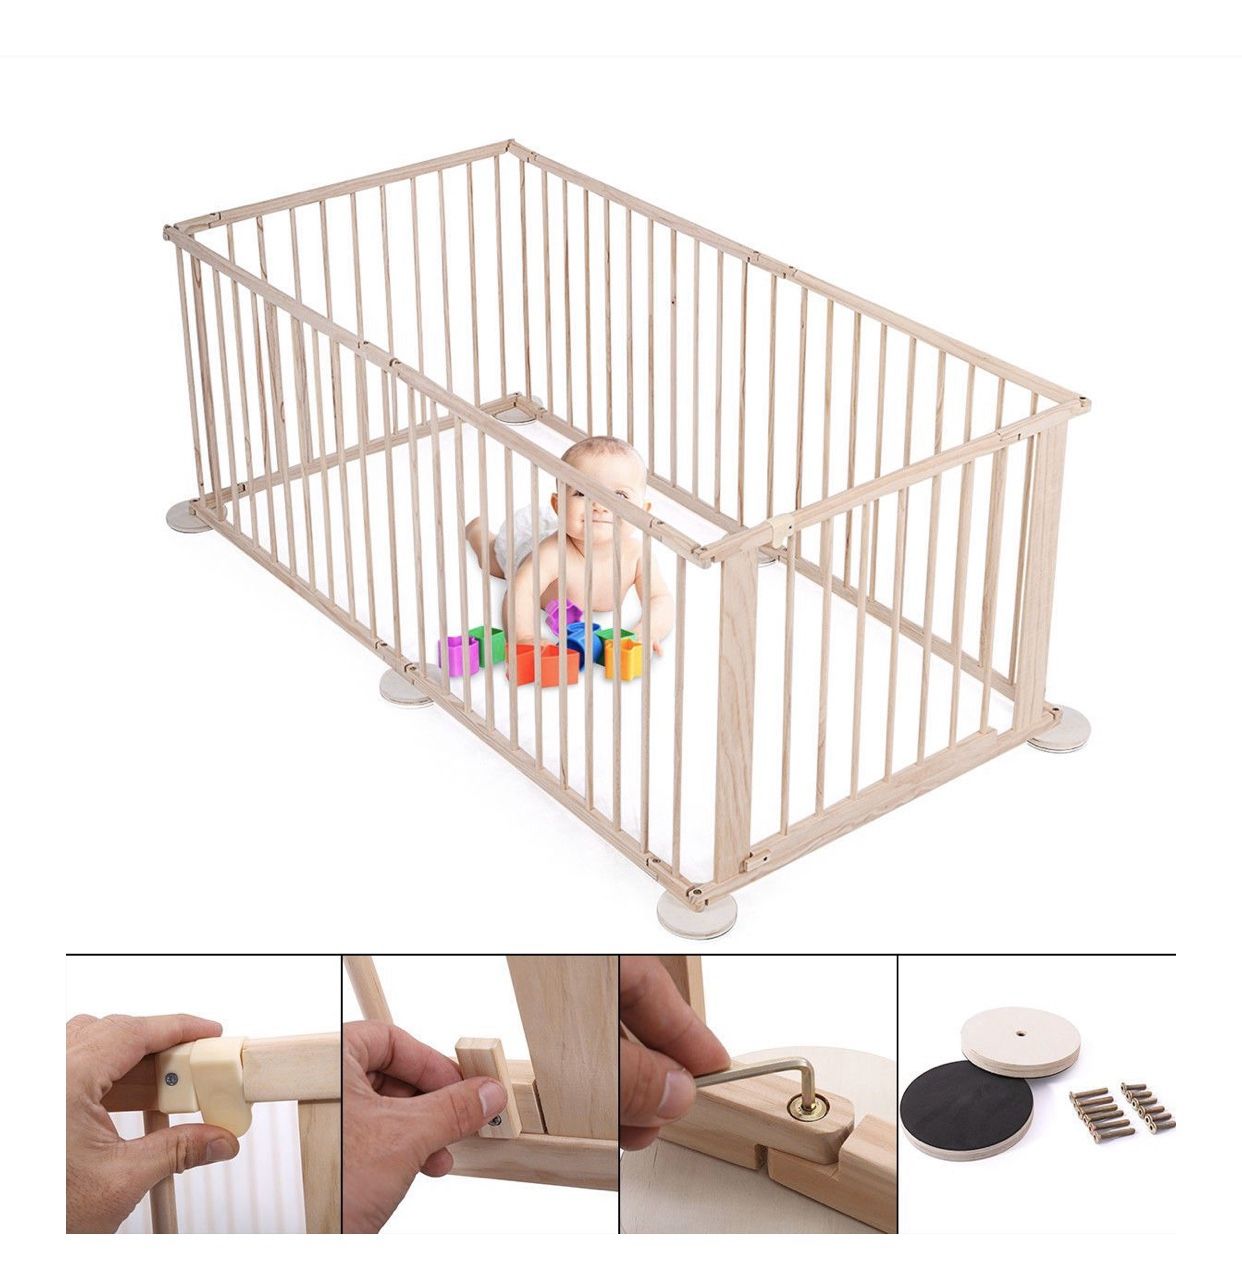 Wood Baby Playpen Kids 6 Panel Safety Play Center Yard Home Indoor Outdoor Game